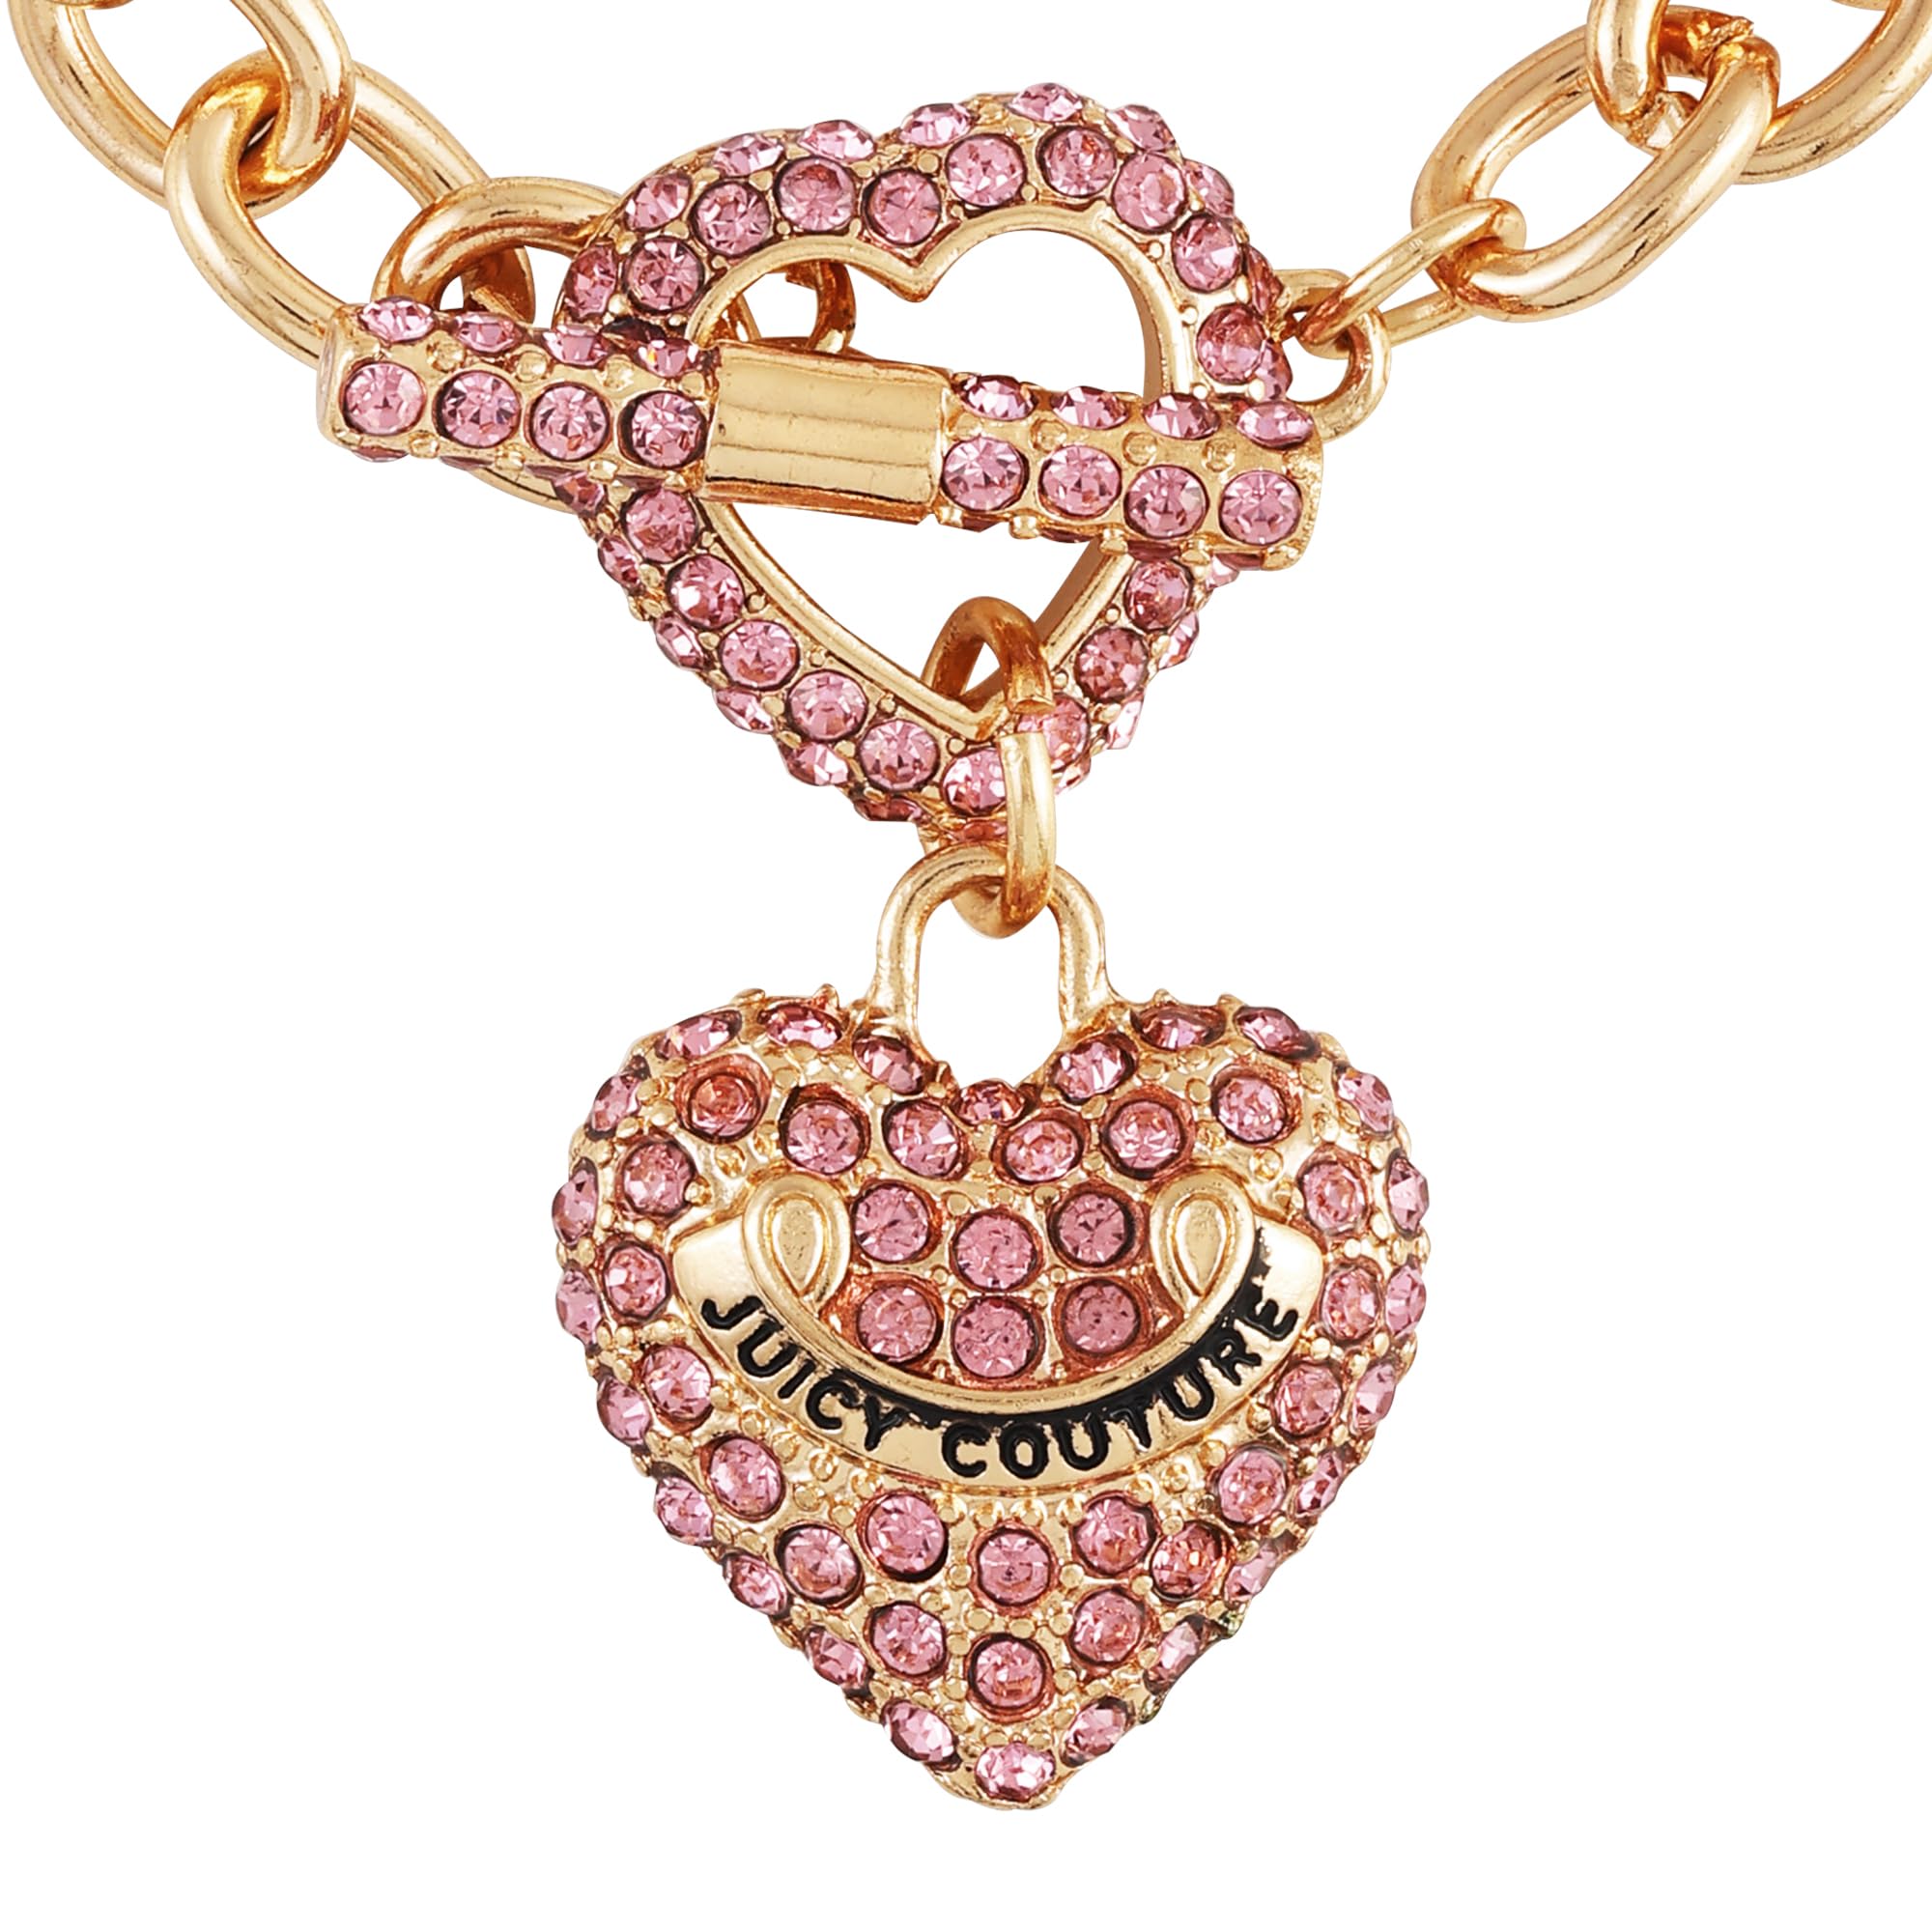 Juicy Couture Light Rose Heart Charm Toggle Bracelet